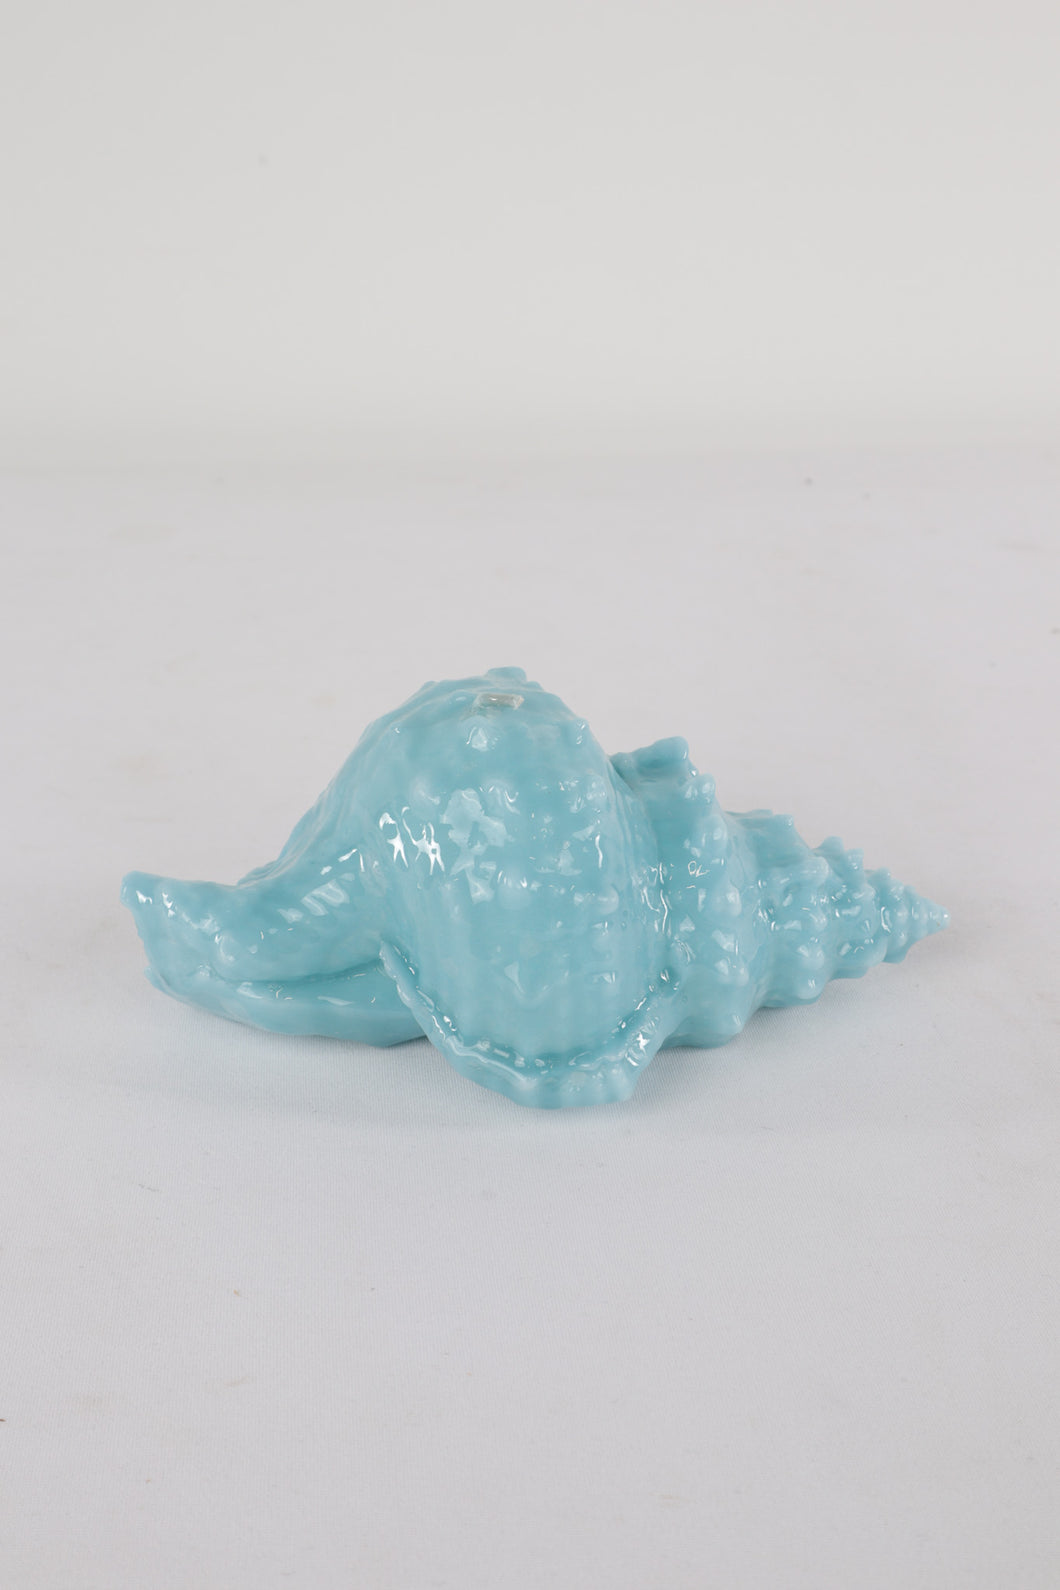 Wax Blue Conch Shell Candle - Handmade